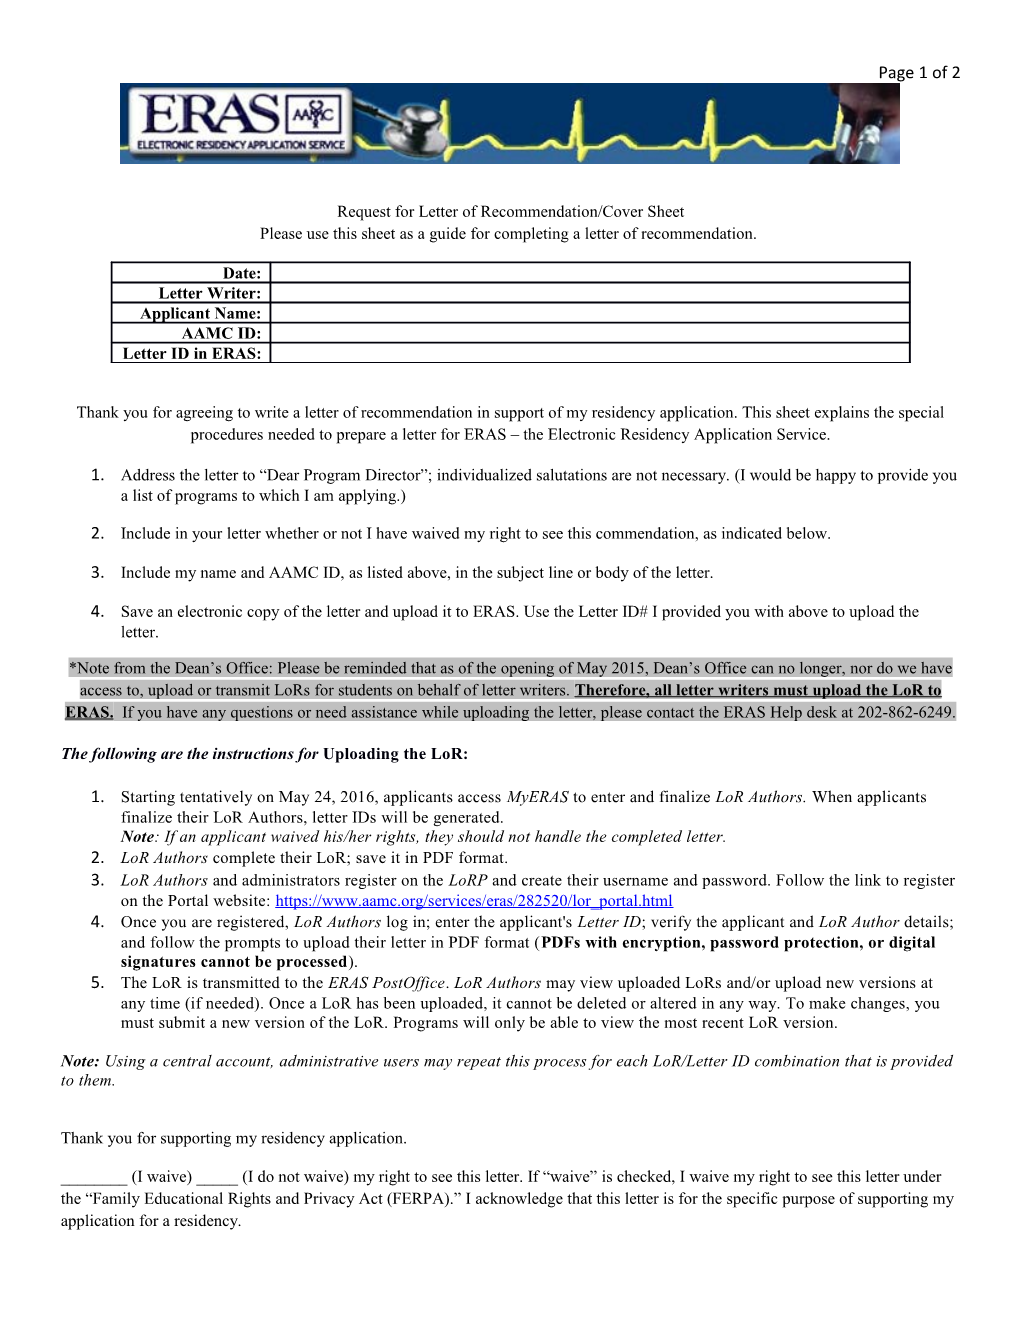 Request for Letter of Recommendation/Cover Sheet Please Use This Sheet As a Guide for Completing